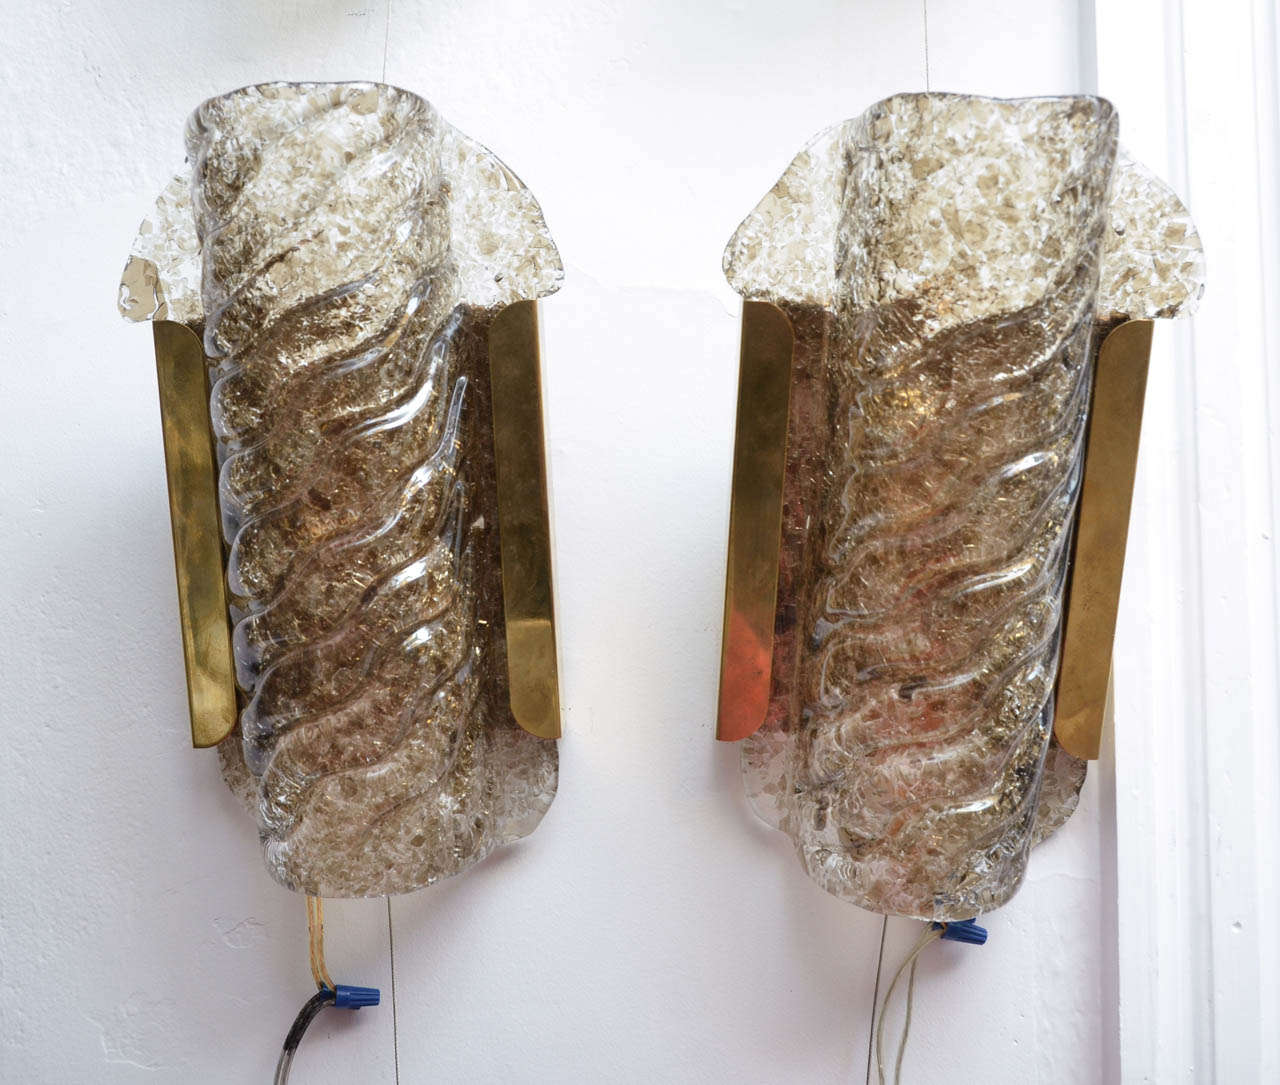 Pair of Mazzega handblown Murano smoked glass wall sconces, takes 2 candlestick style bulbs up to 60 watts.